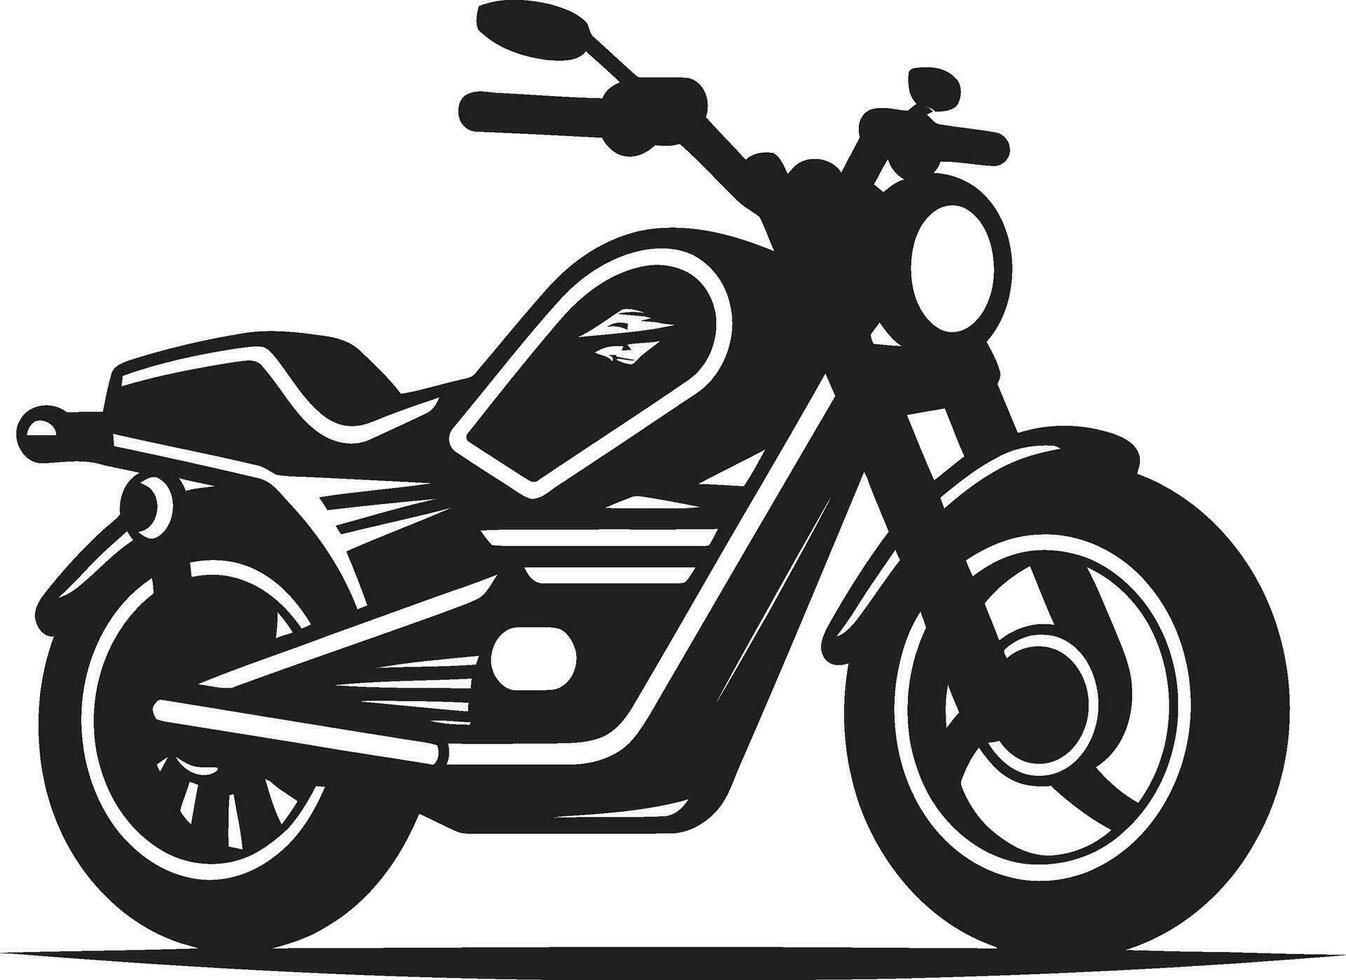 Speed and Style Motorcycle Vector Illustrations Vector Graphics Capturing Motorcycle Beauty